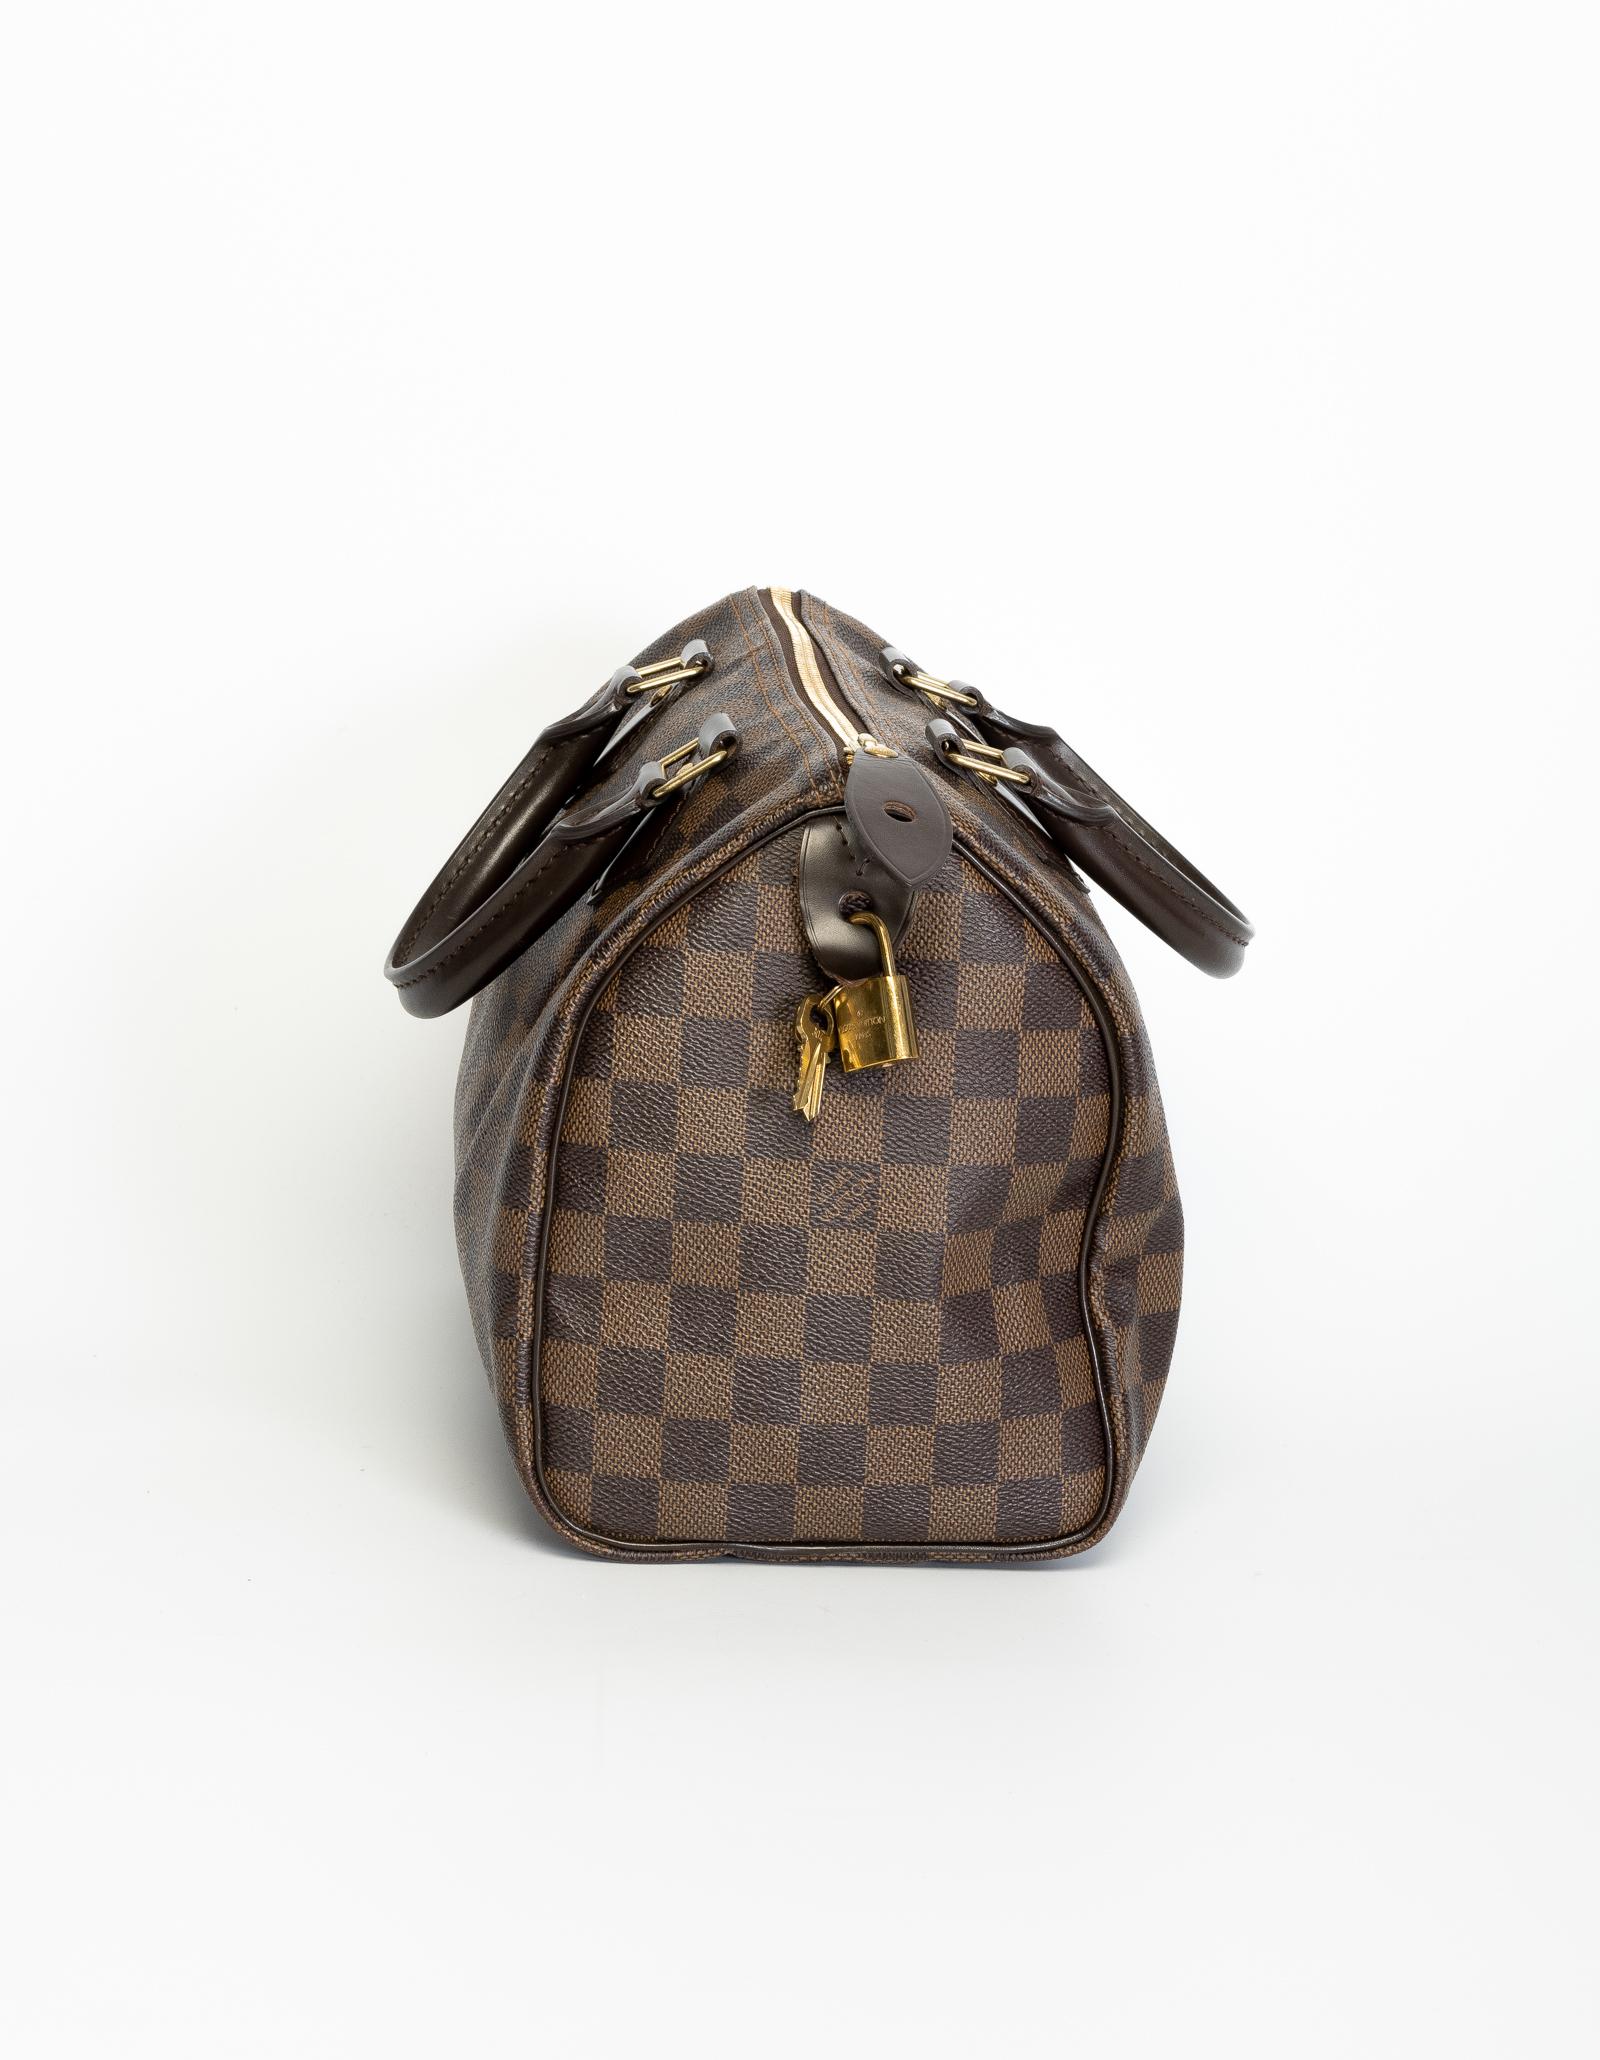 Speedy 25cm. This Speedy 25 is made of Damier Ebene canvas and features leather finishes, rolled leather handles, brass hardware, top zip closure & red fabric interior lining. (Damier is French for checkerboard)
**Authenticated by entrupy**

COLOR: